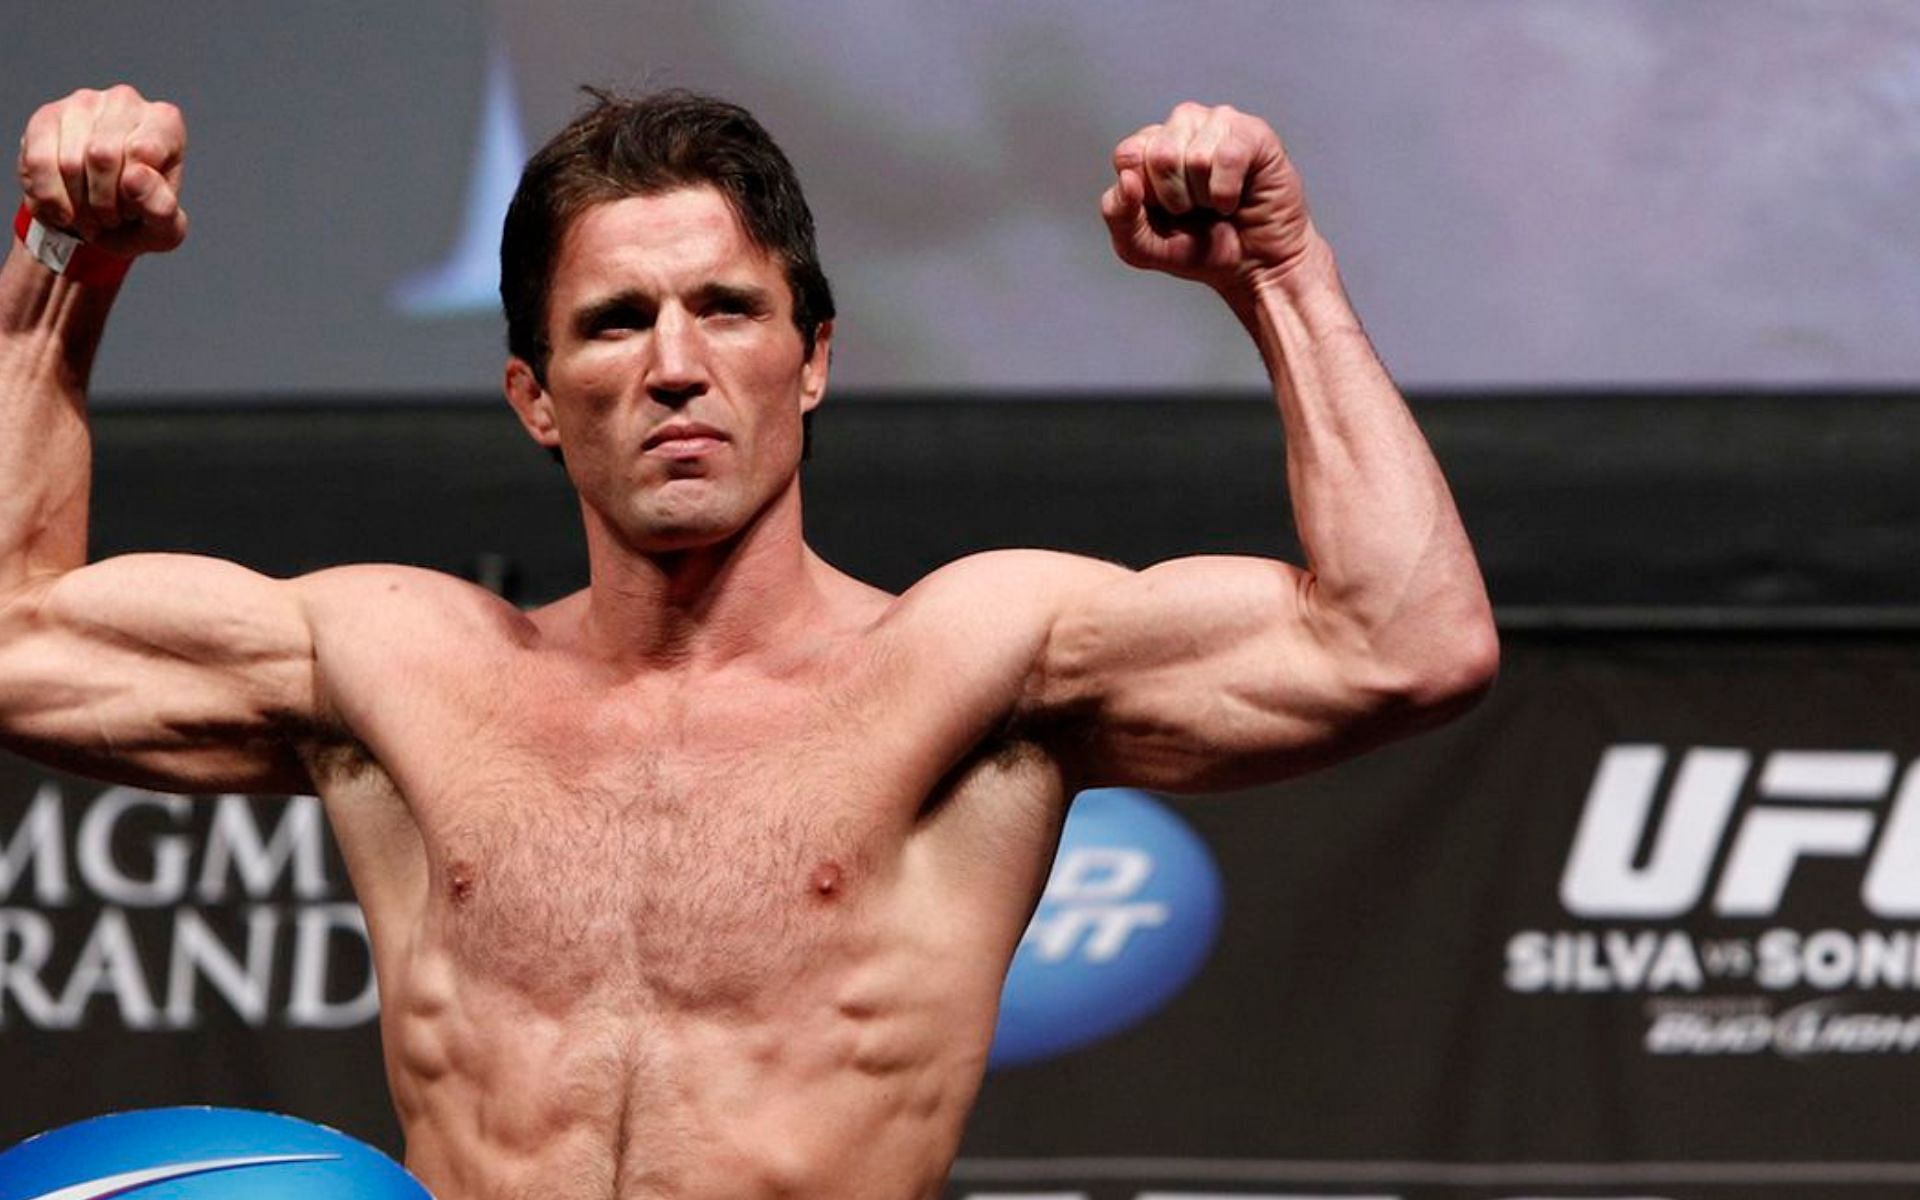 Former UFC Fighter Chael Sonnen (Image Courtesy - MMA Fighting)